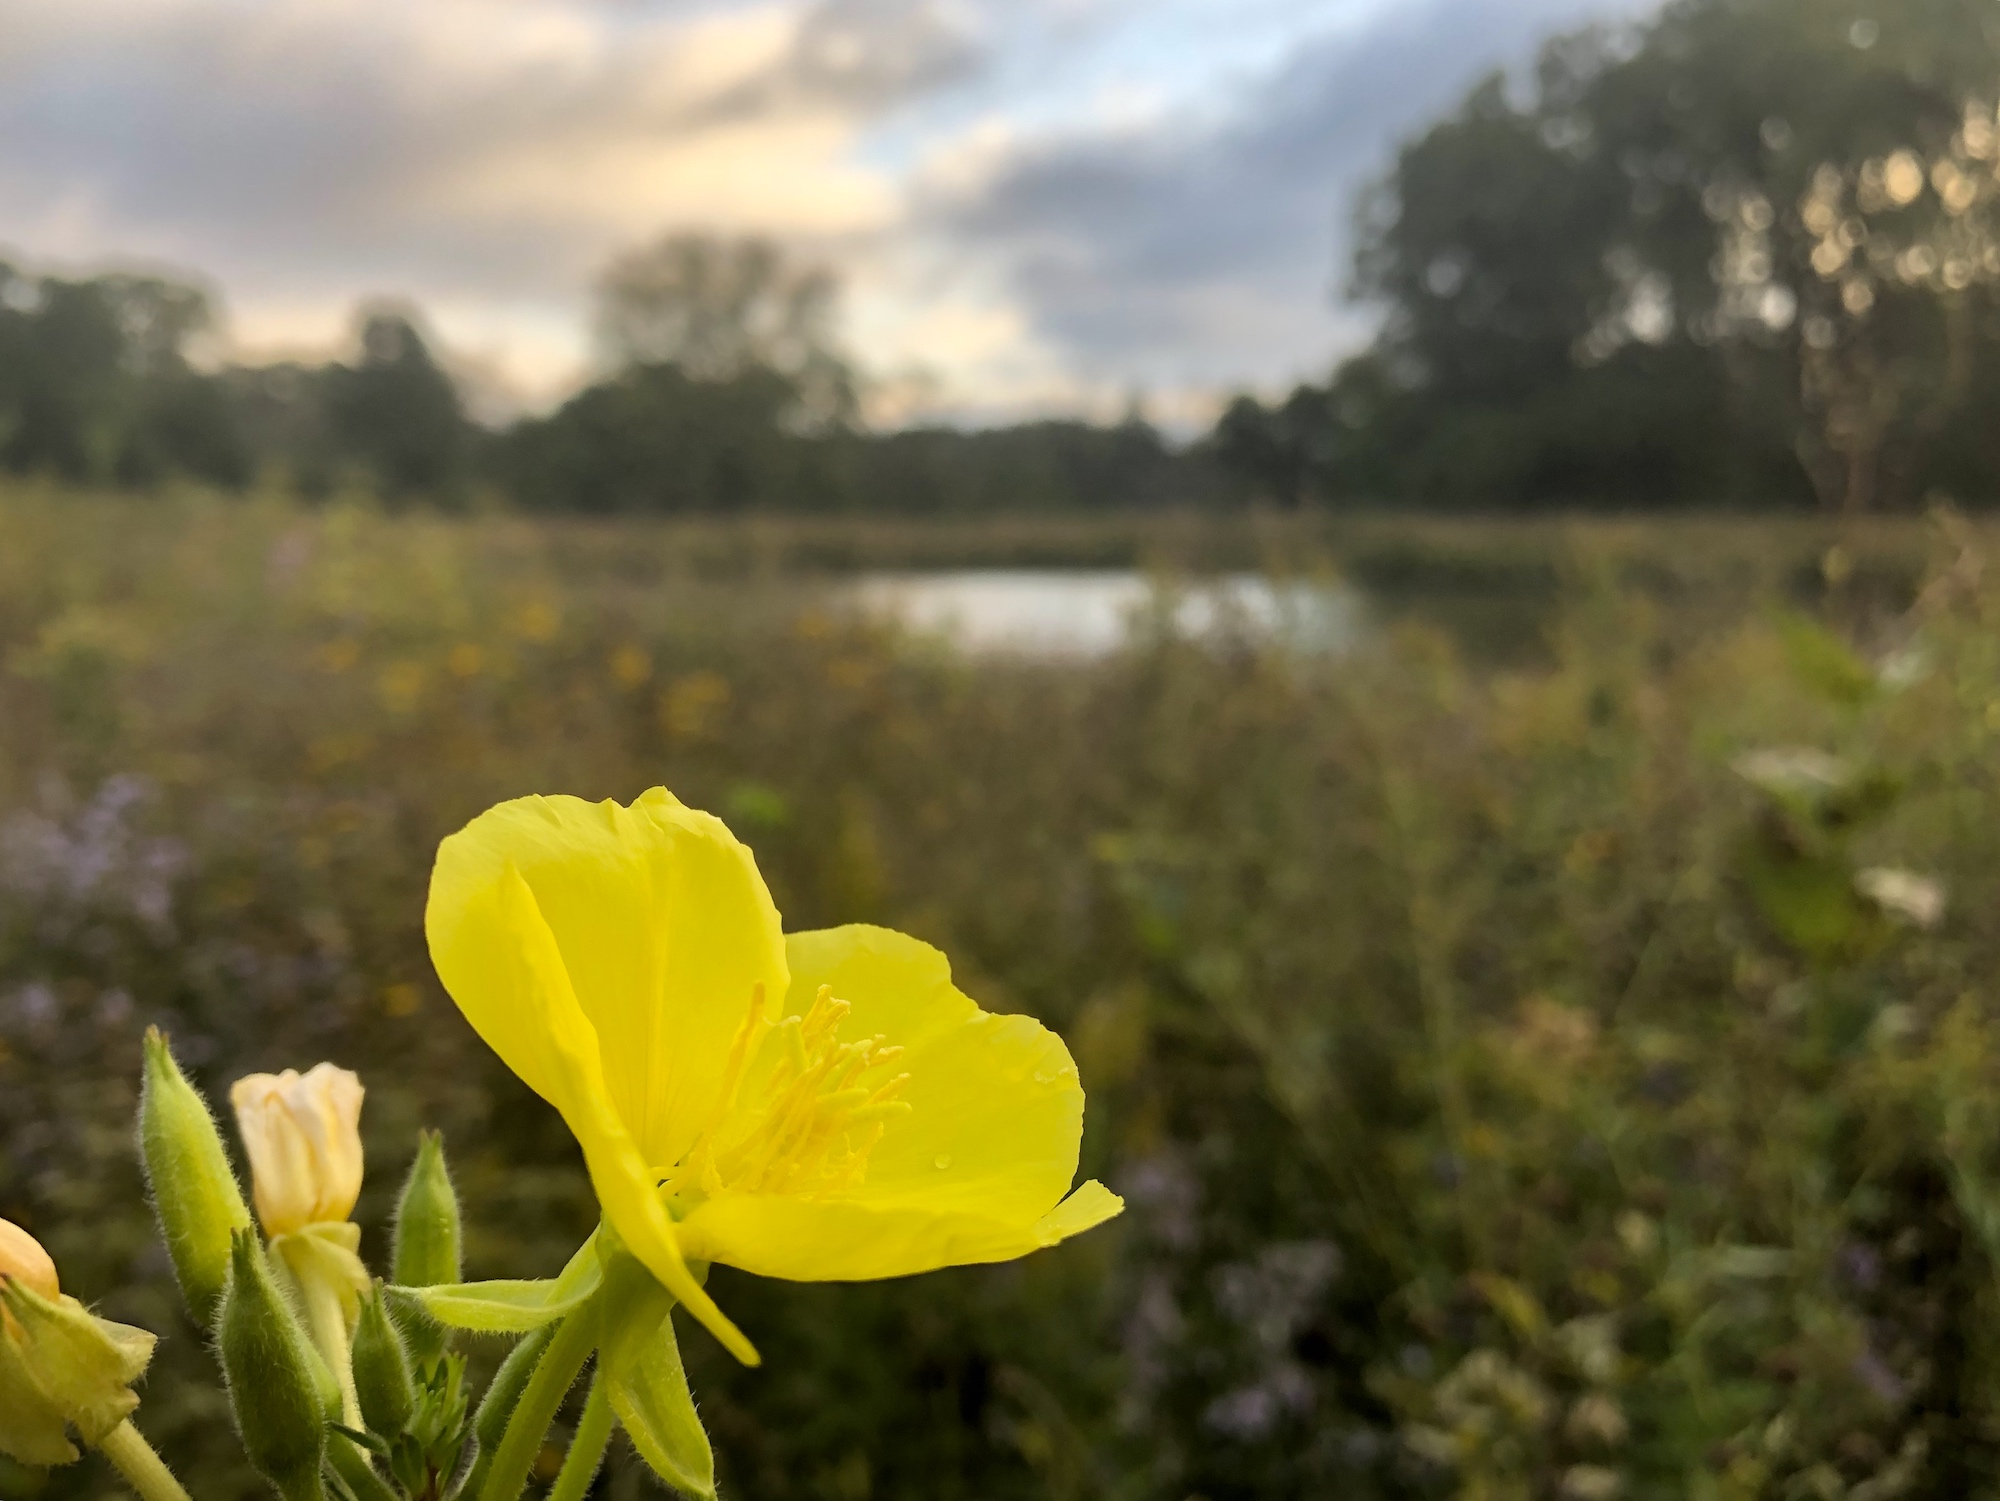 Evening Primrose along shore of the Retaining Pond on the corner of Nakoma Road and Manitou Way on September 25, 2019.